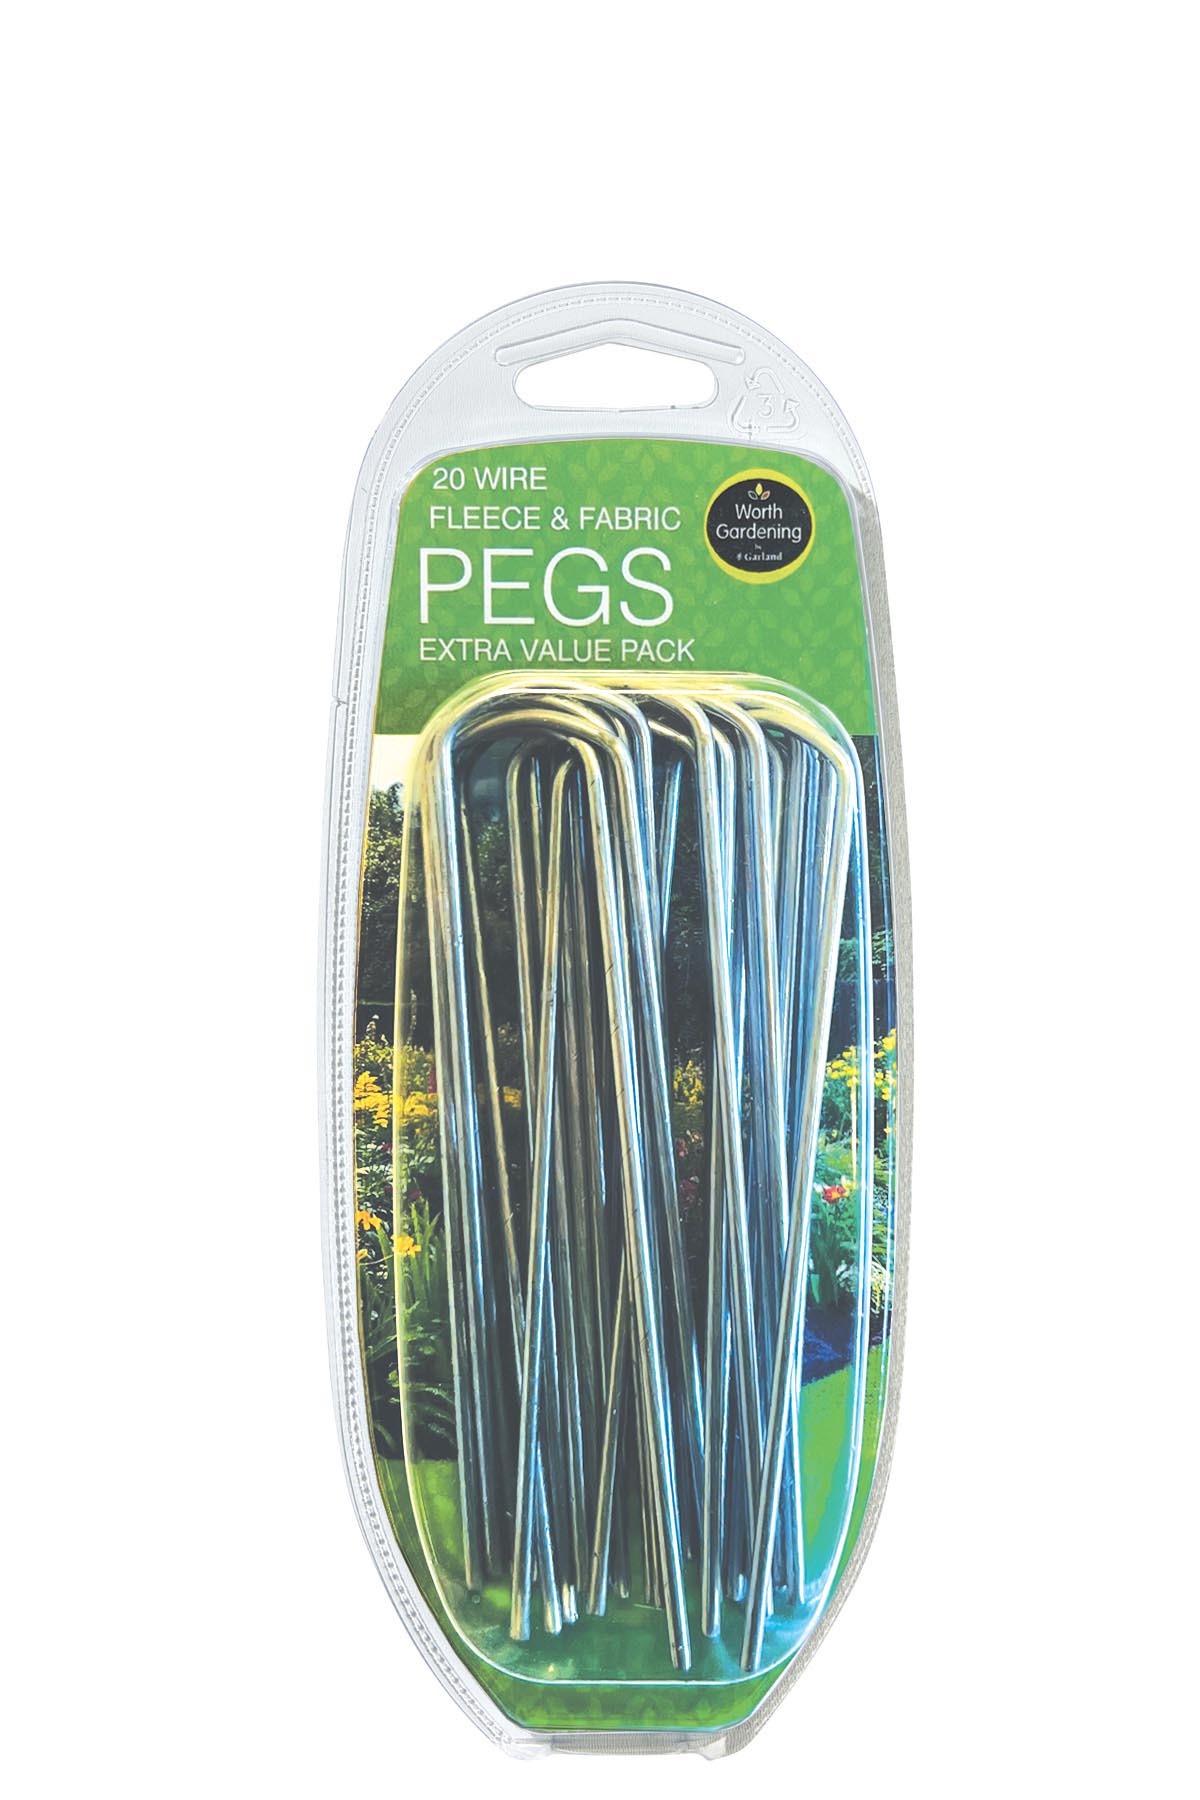 Wire Fleece & Fabric Pegs Etra Value Pack